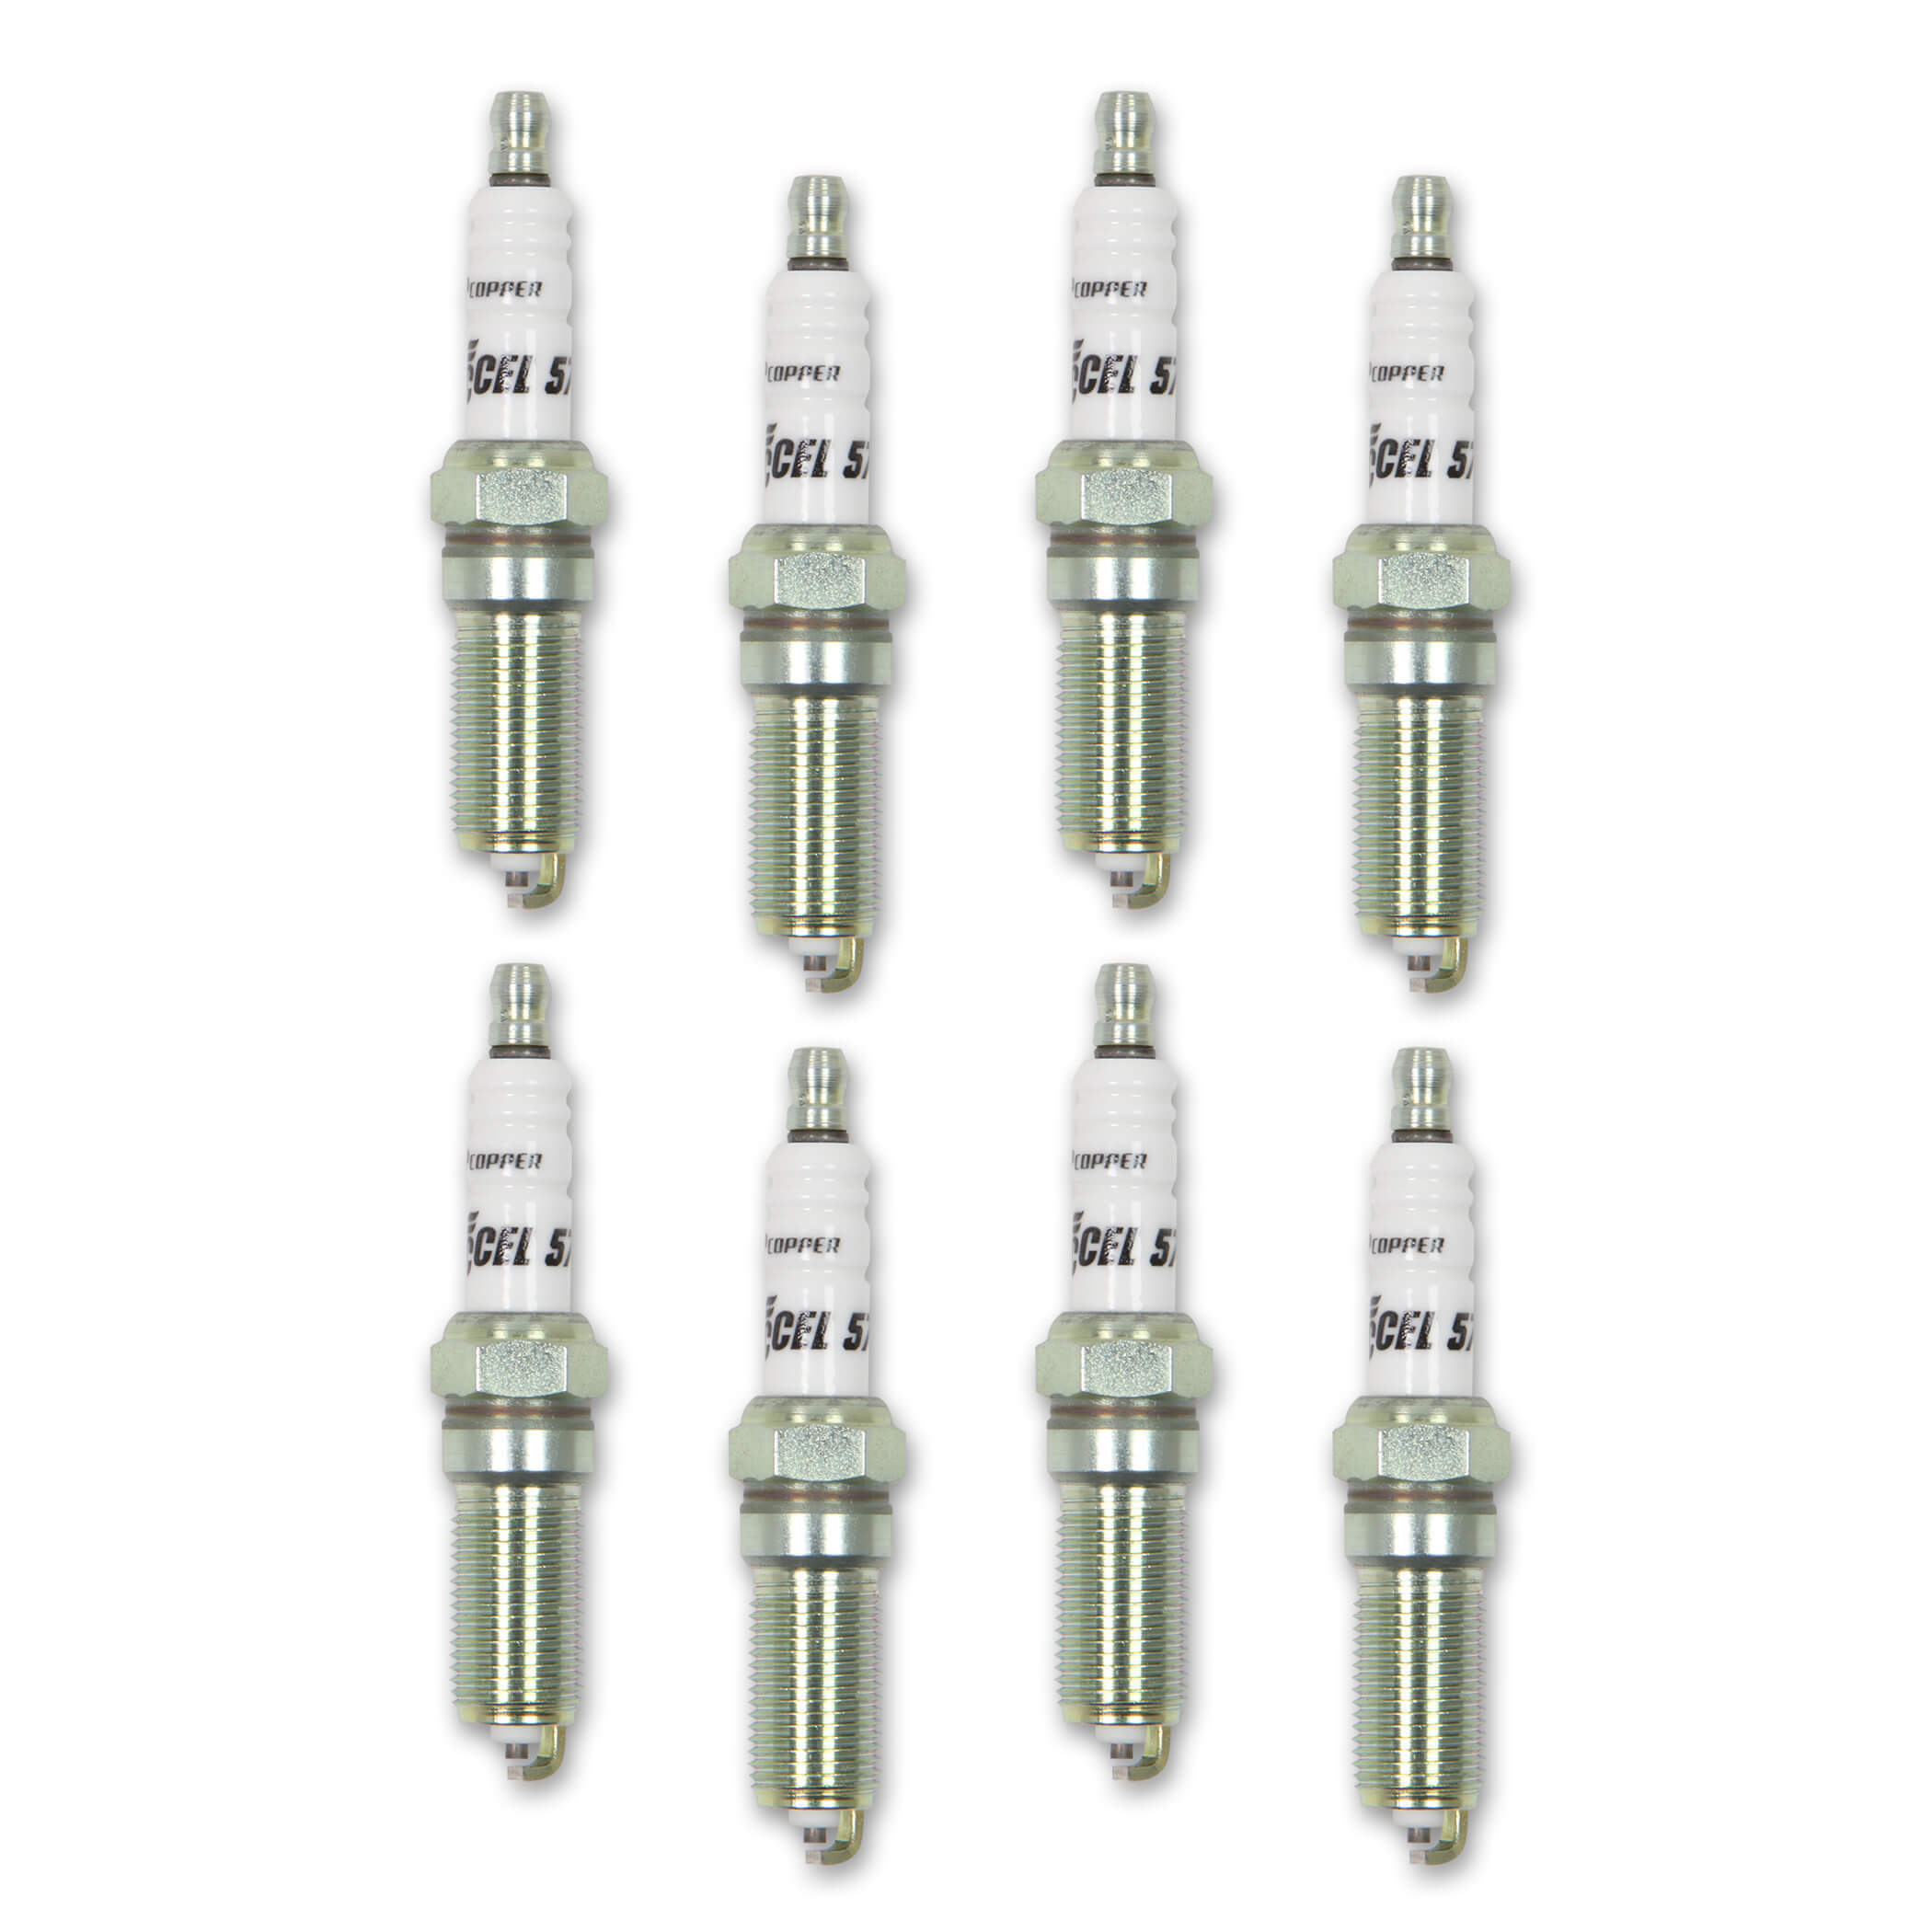 Accell Spark Plug, HP Copper, 14 mm Thread, 1" Reach, Tapered Seat, Resistor, Set of 8